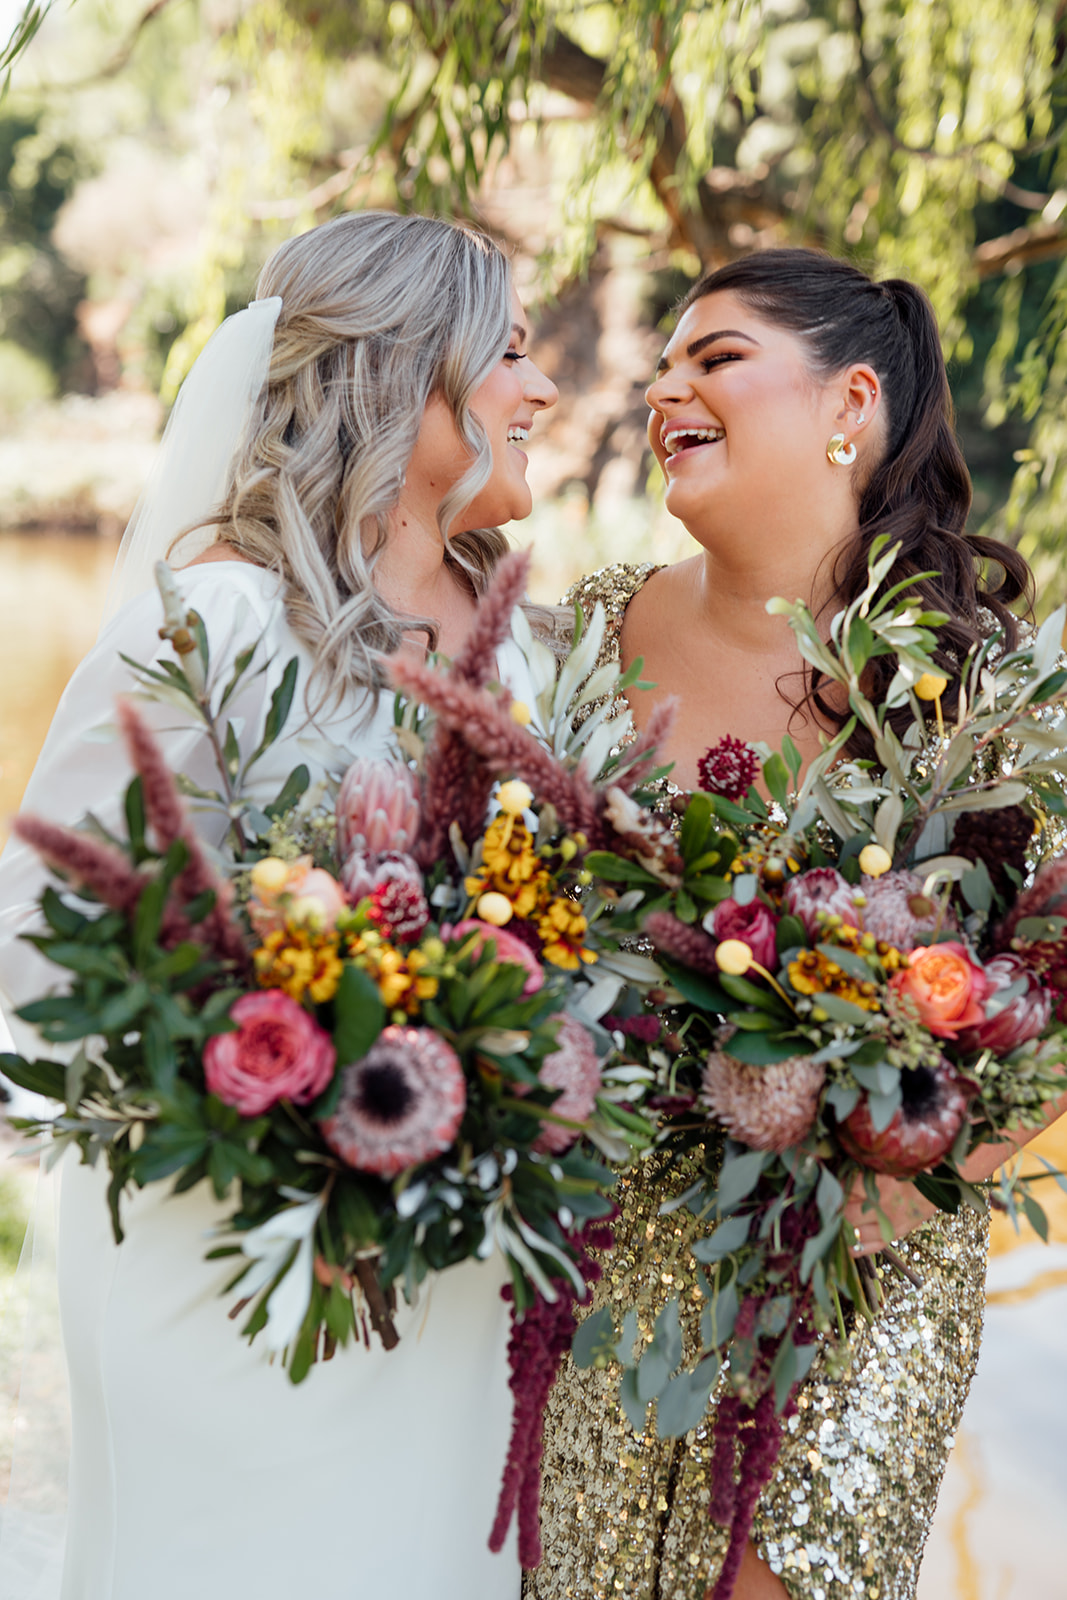 Nikki - Karen Willis Holmes - Sarah & Gabriella- Lgbt wedding, full of bold and unique elements. Same sex couple seen holding each other for their couple portraits, with their colorful and Australian natives floral arrangements. Brides are wearing a classic, long sleeve wedding dress.